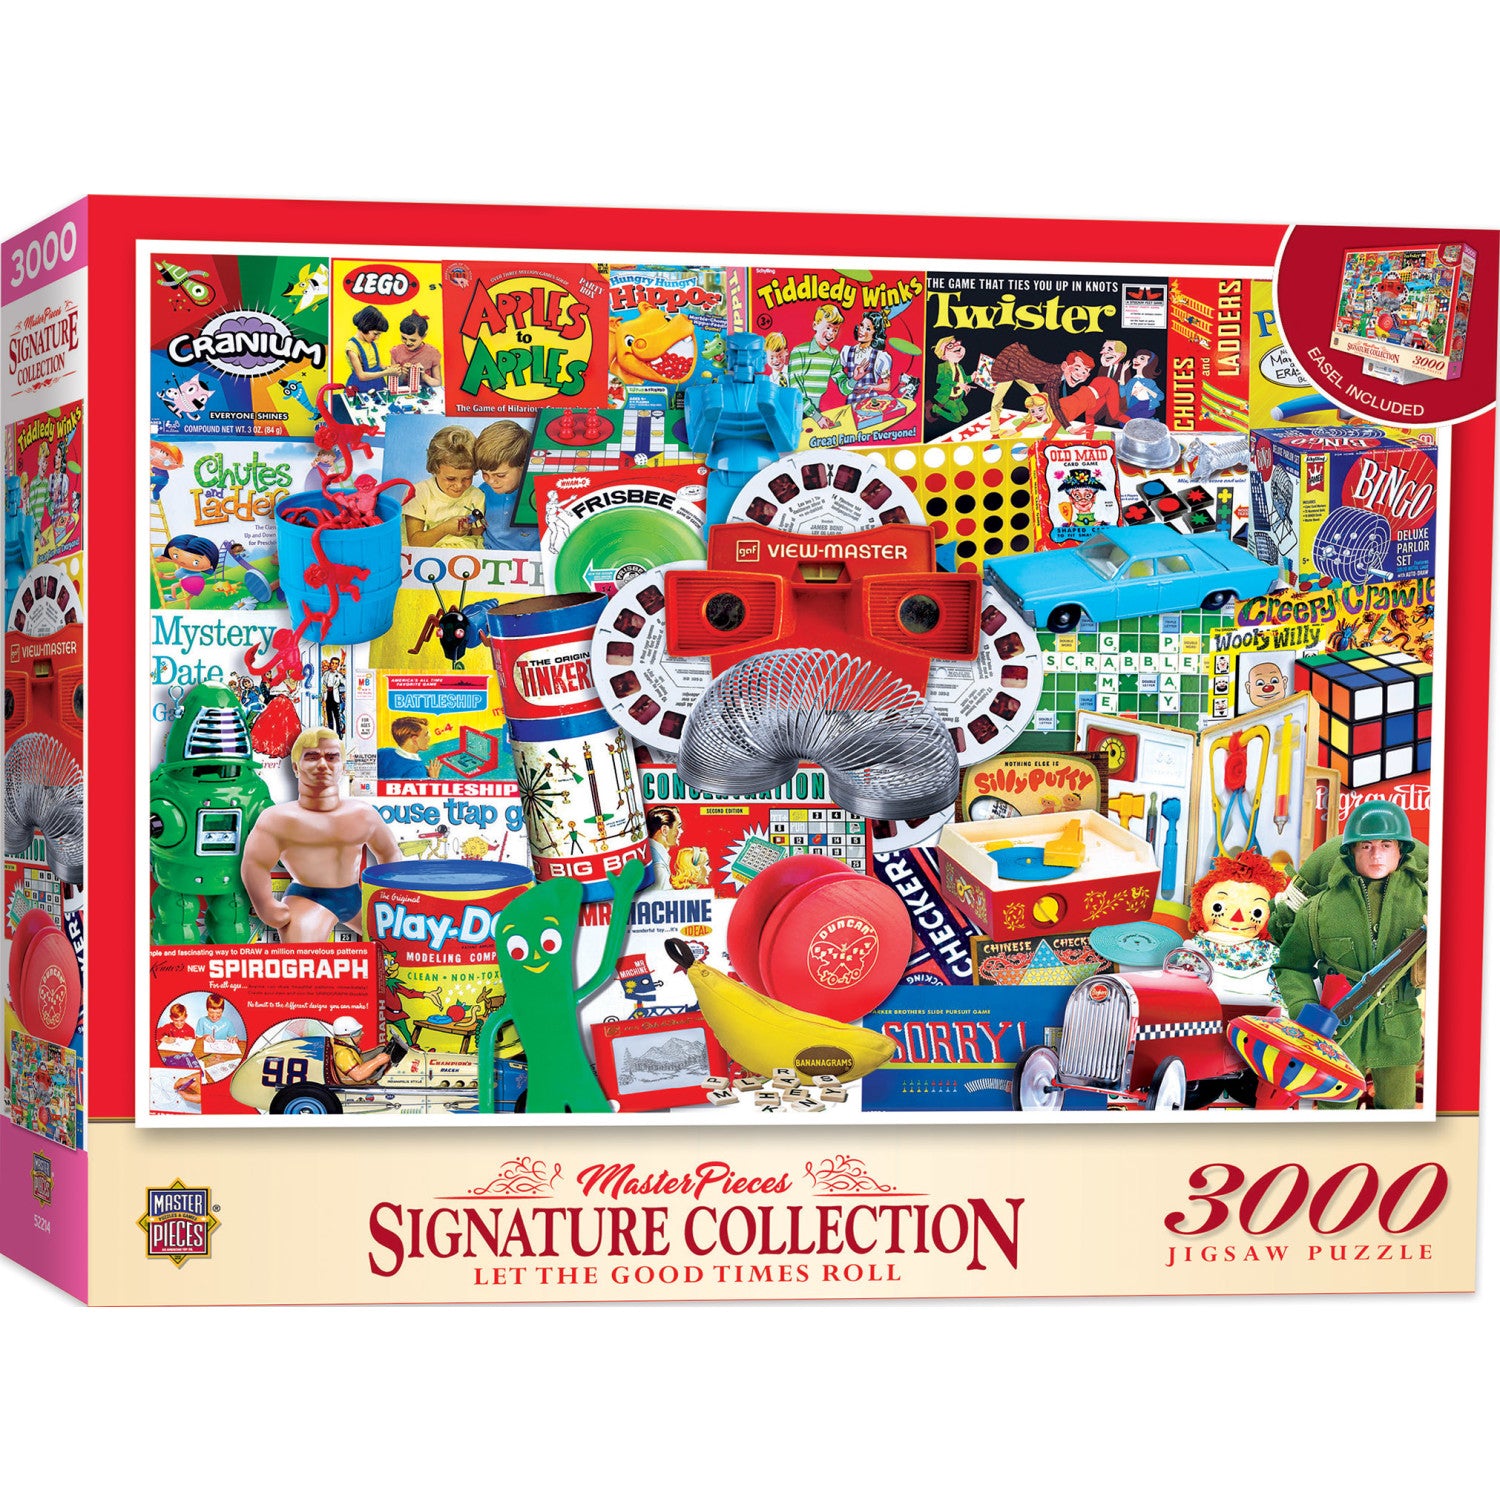 Signature Collection - Let the Good Times Roll 3000 Piece Puzzle